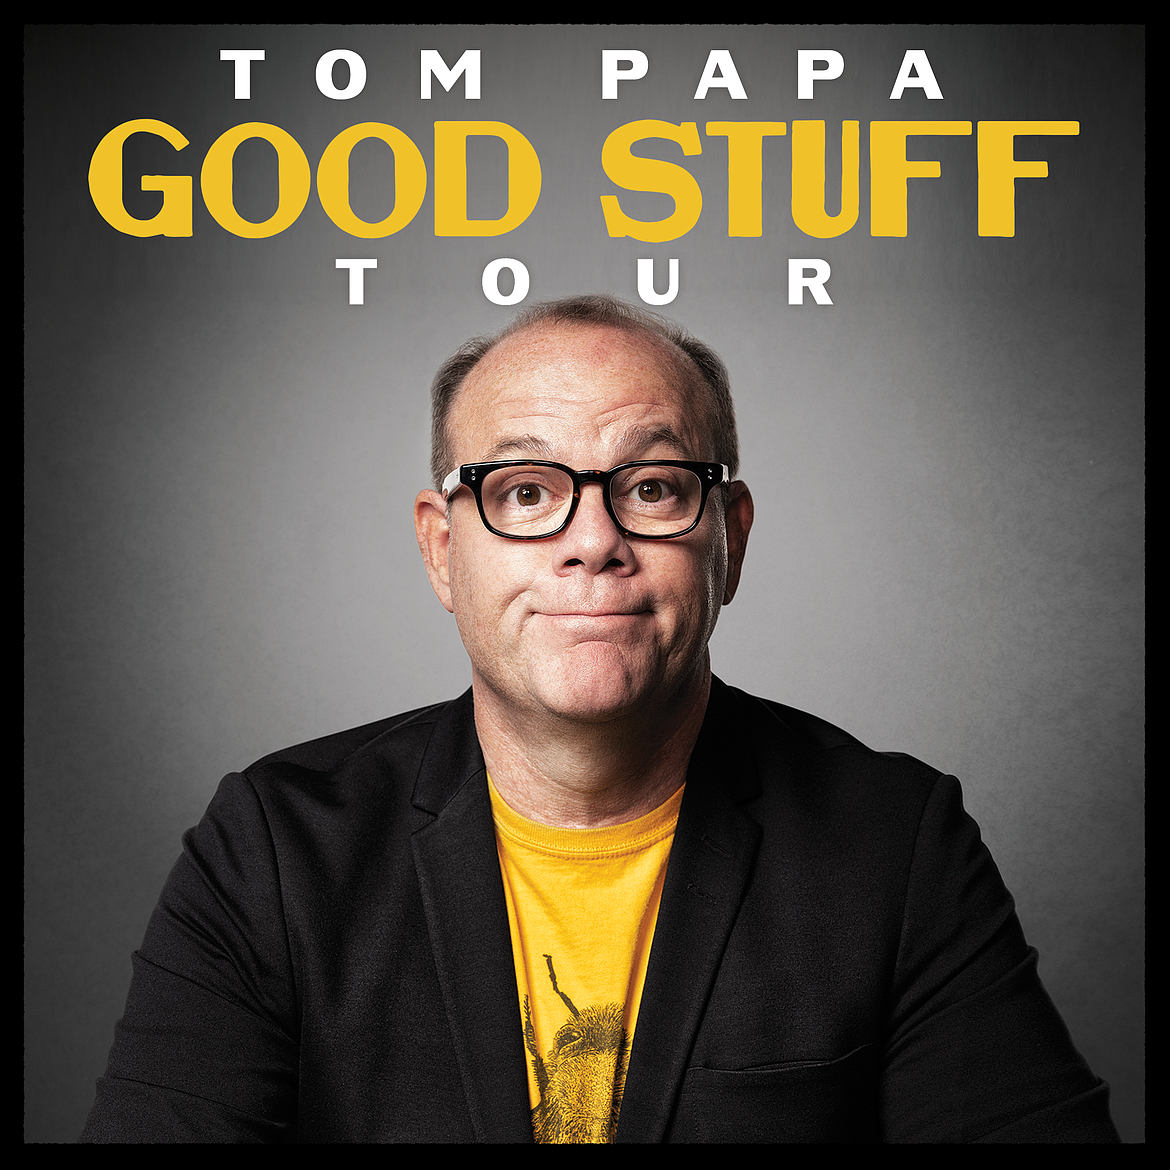 Comedian Tom Papa shares "The Good Stuff" March 1 at the Wachholz College Center. (Courtesy photo)